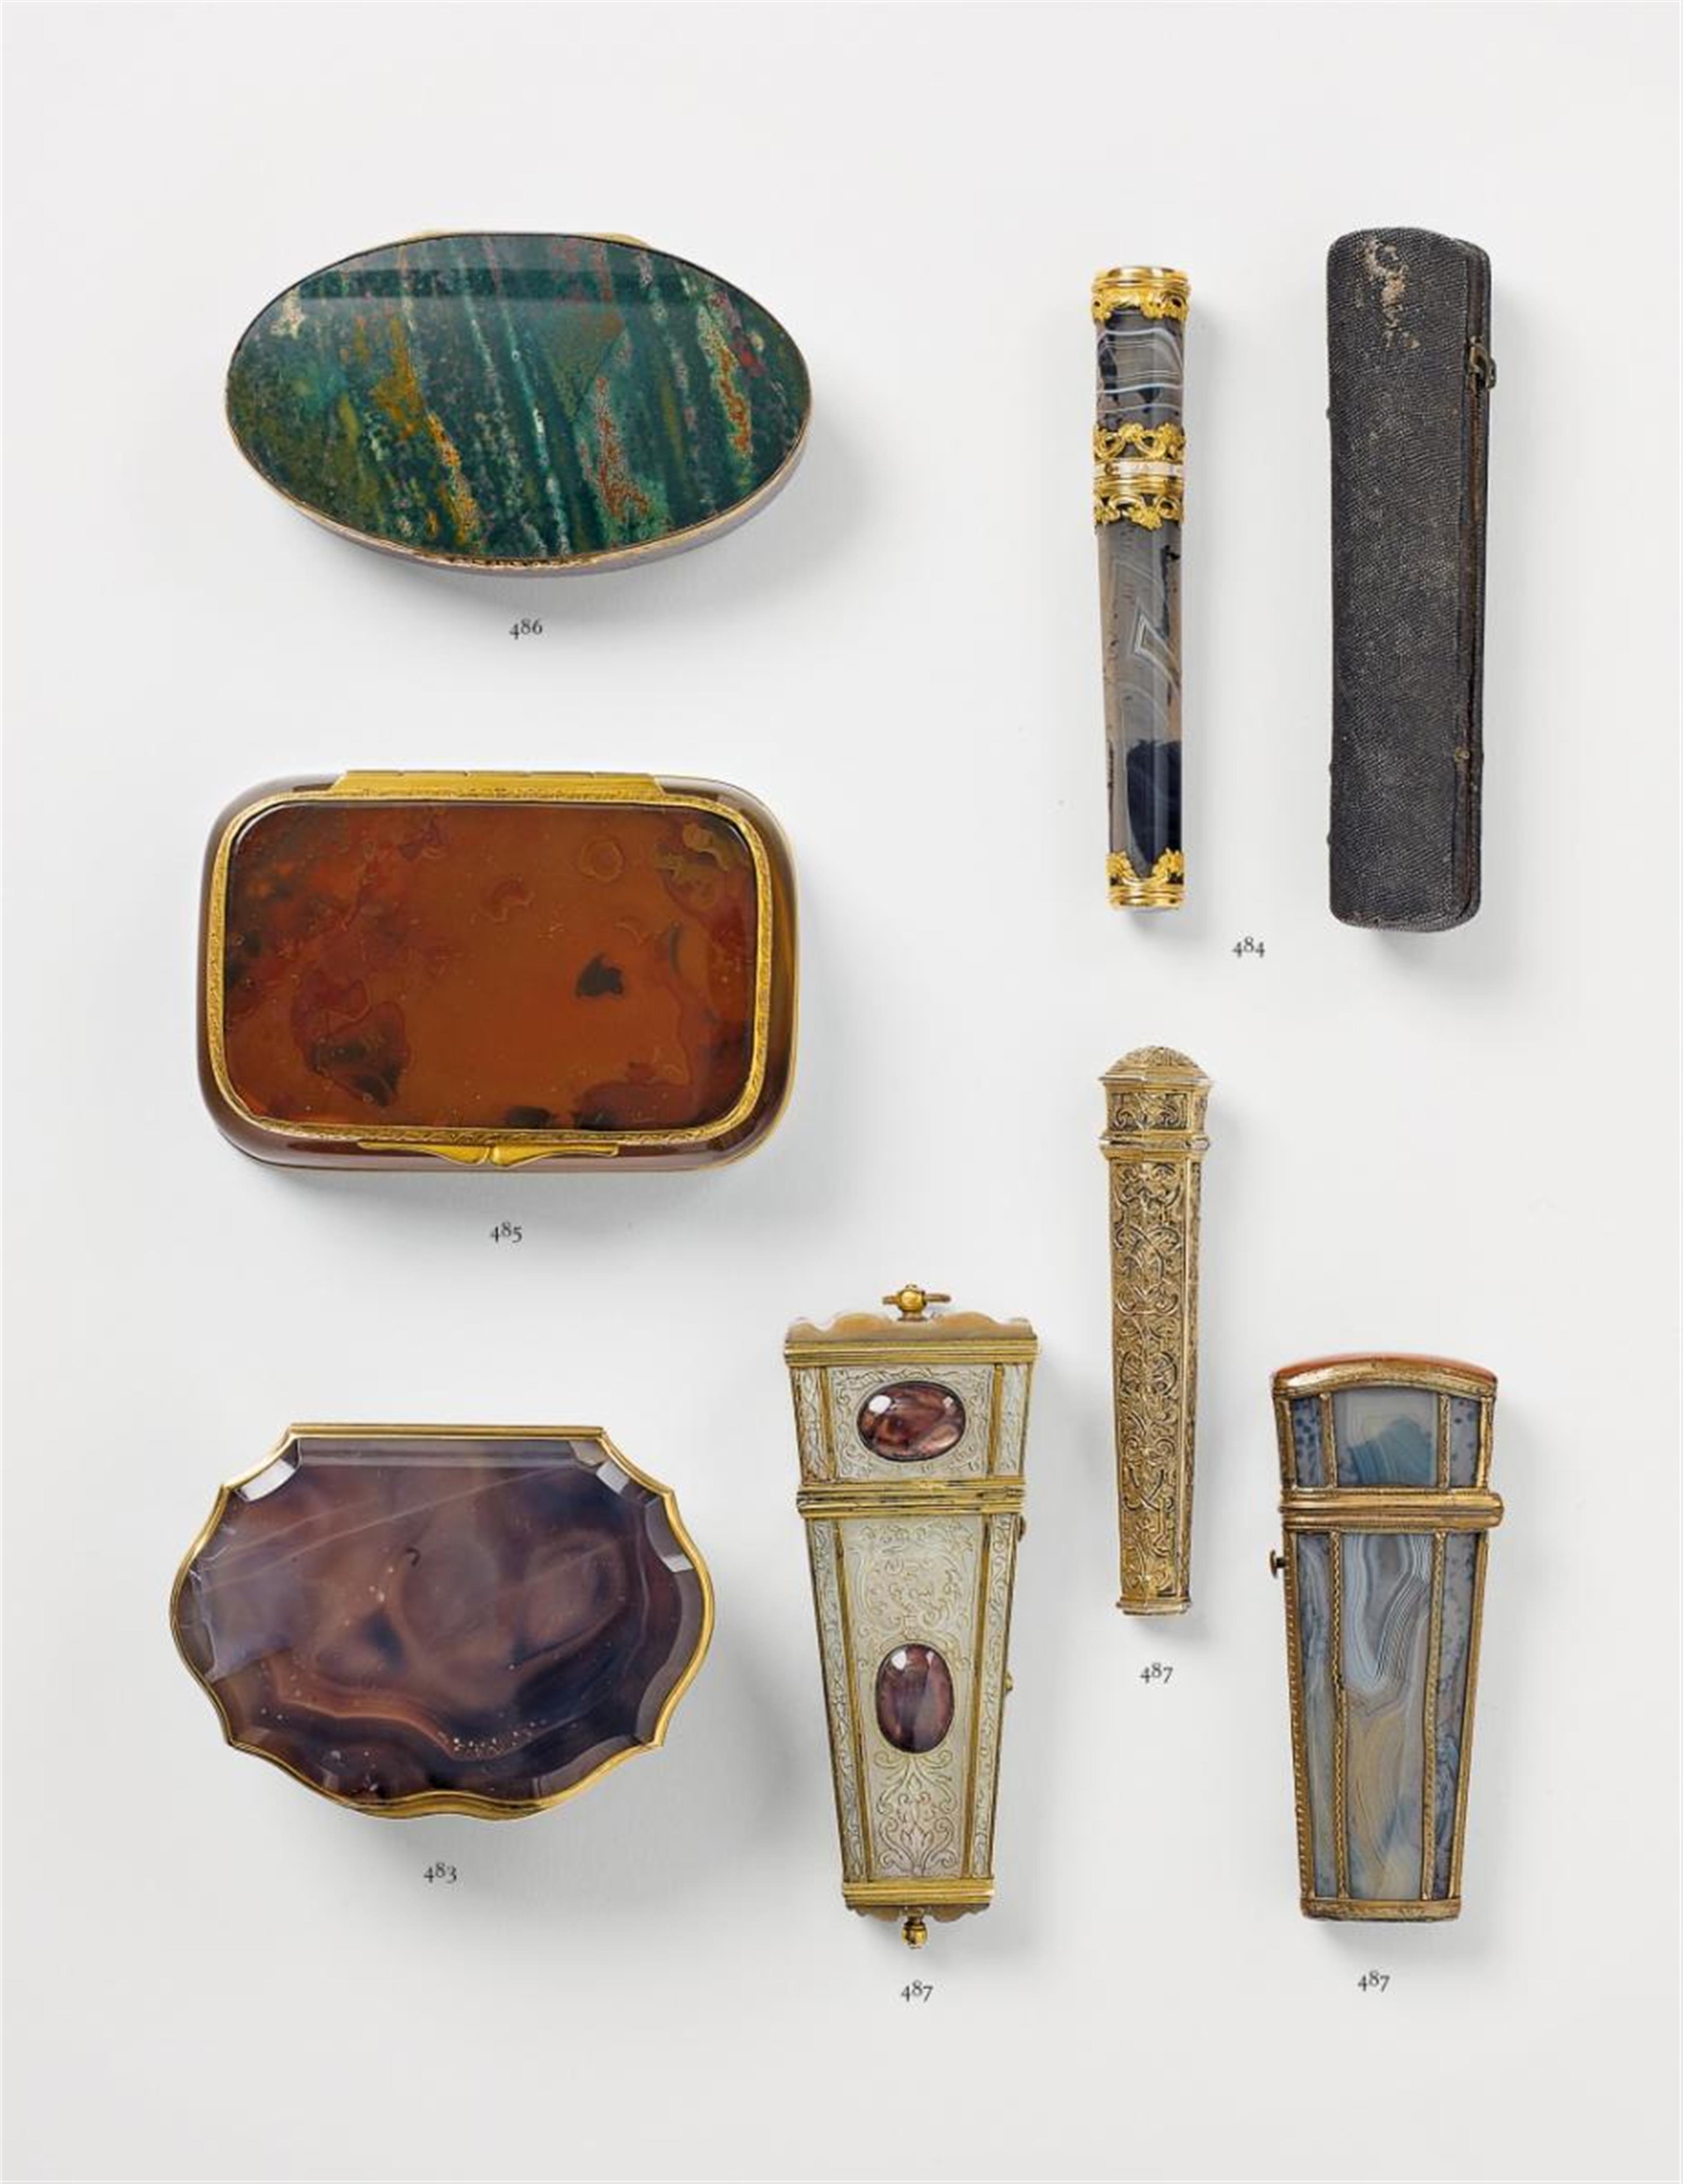 An English George II 18 ct gold-mounted agate hair pin holder inscribed "J'aime mon choix", in the original case - image-1